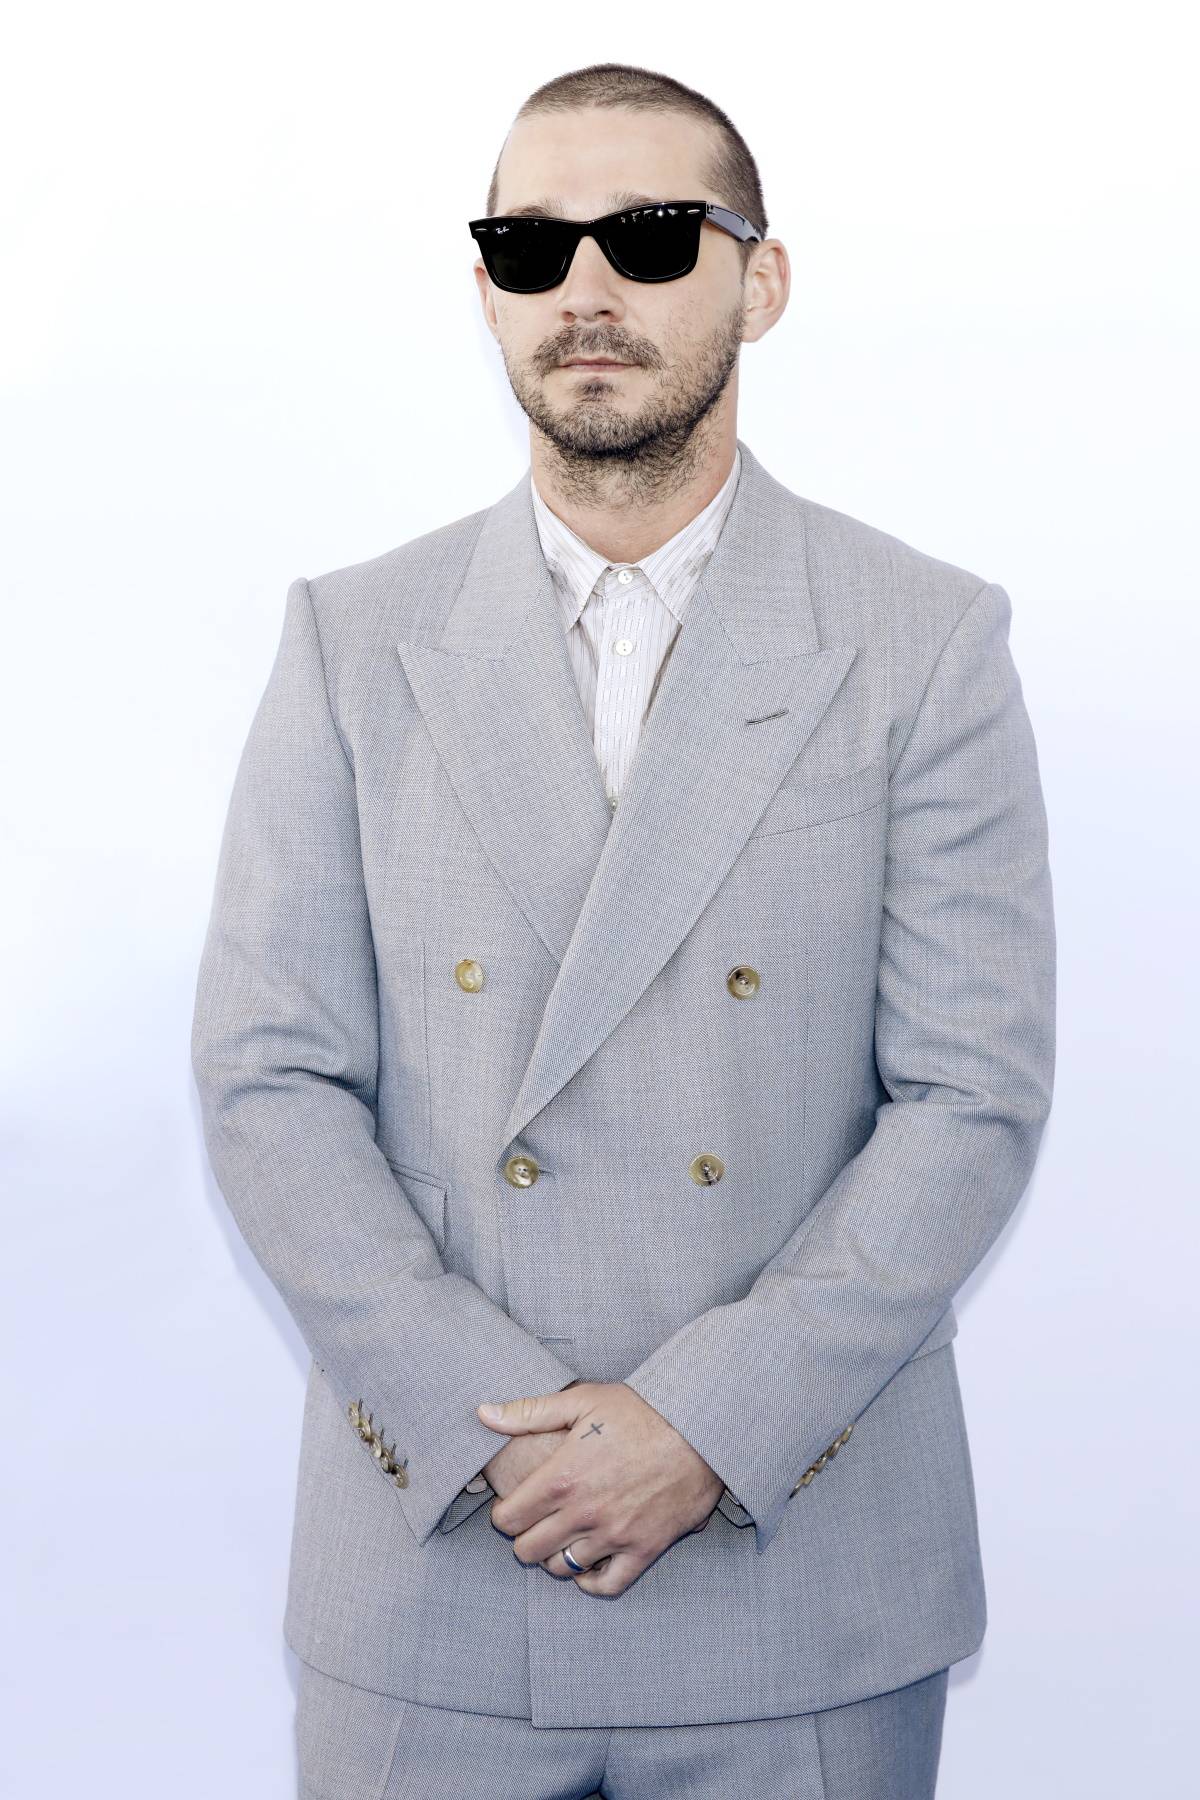 Shia LaBeouf (Fot. Getty Images)